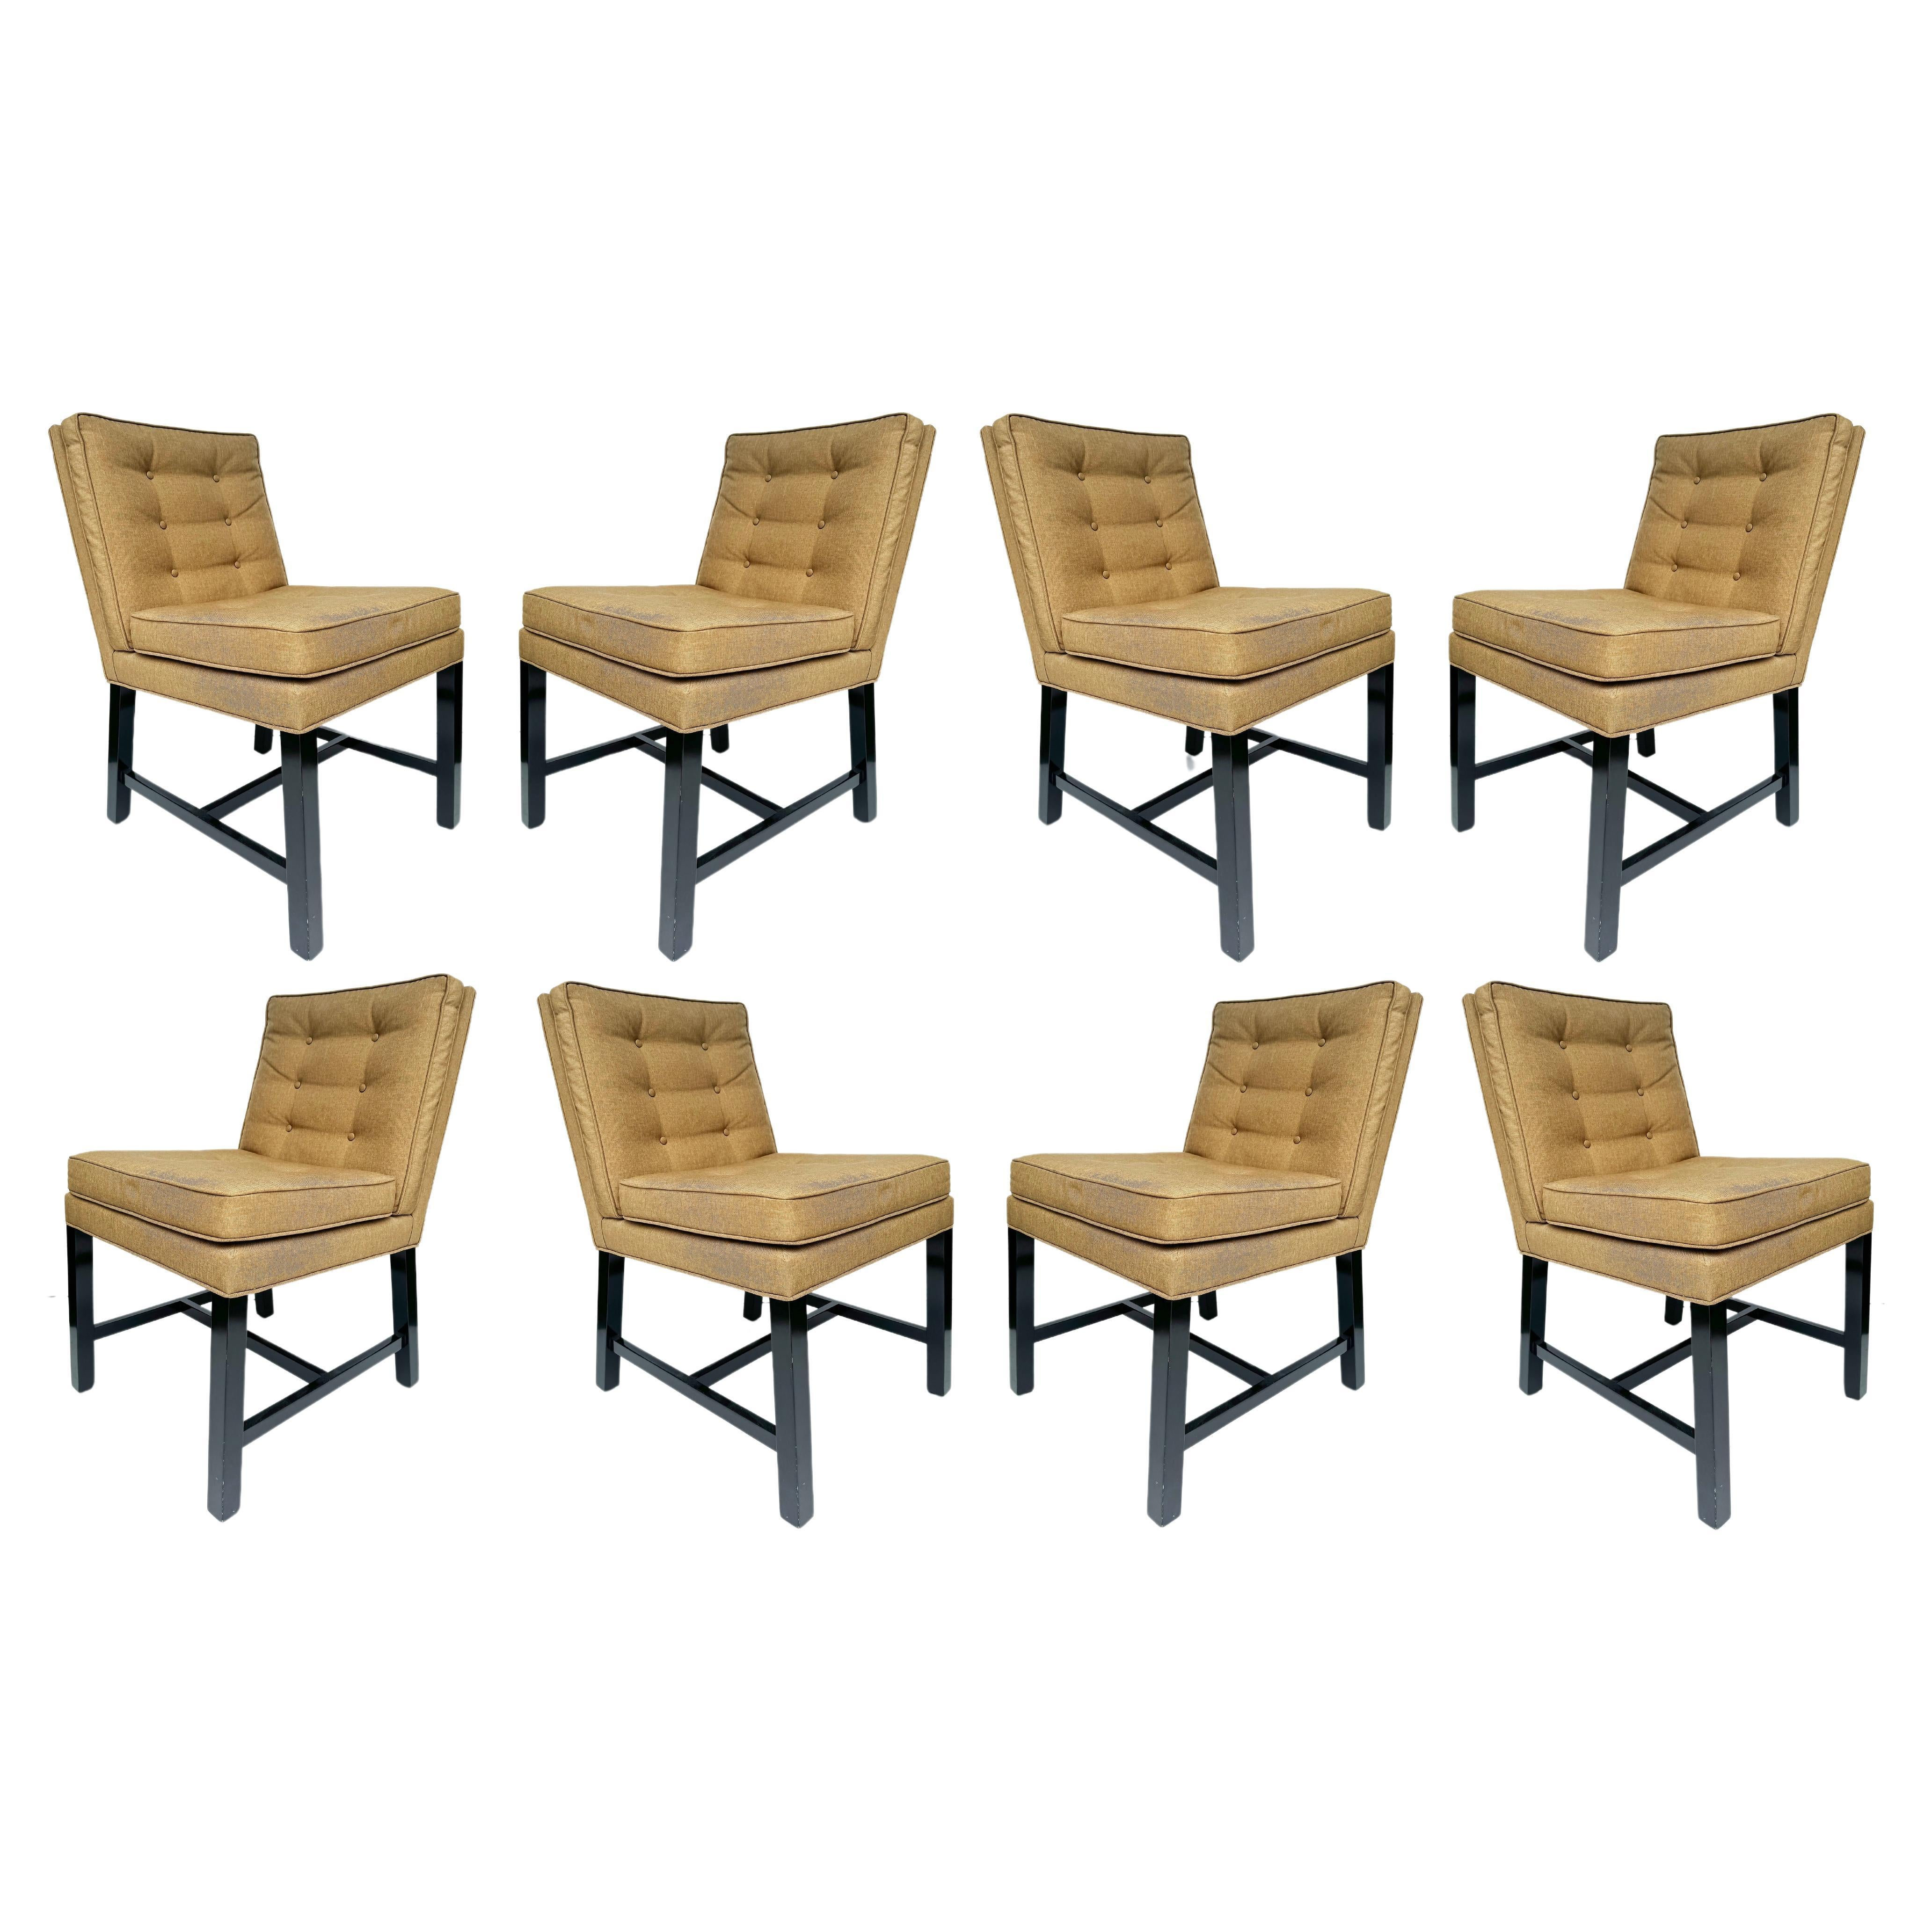 Set of 8 Mid-century Upholstered Dining Chairs, Harvey Probber Attributed